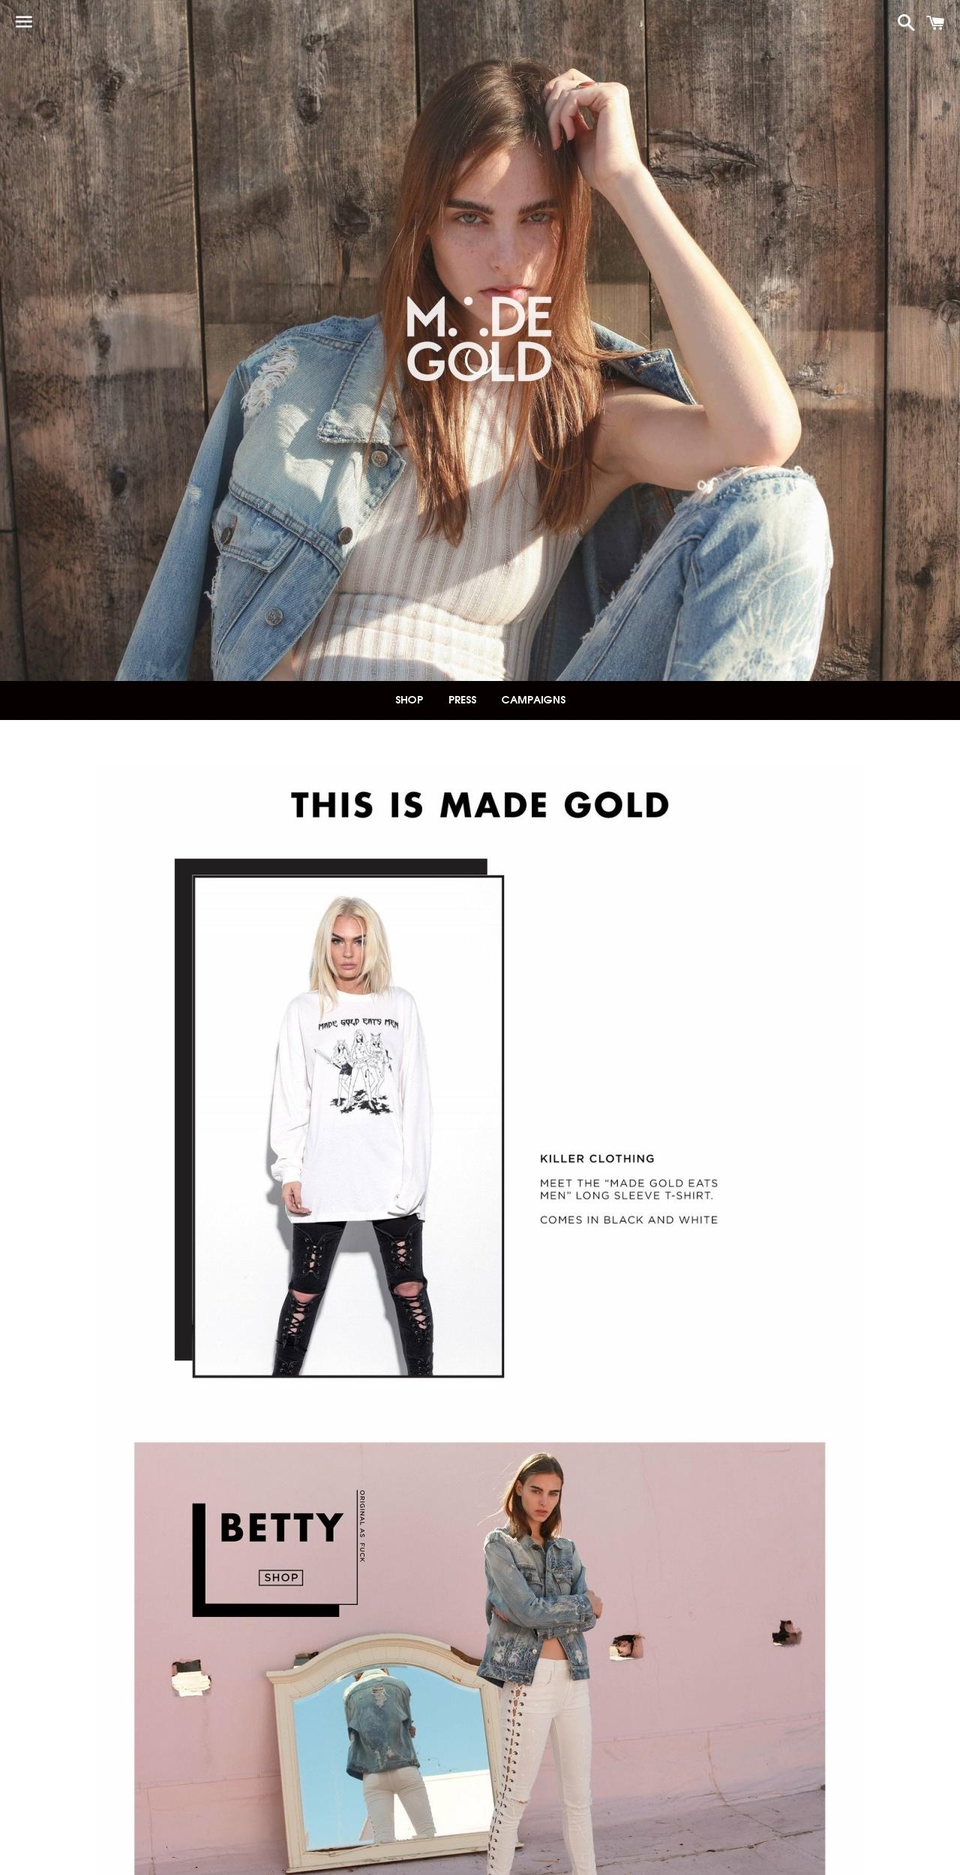 Reformation Shopify theme site example madegold.com